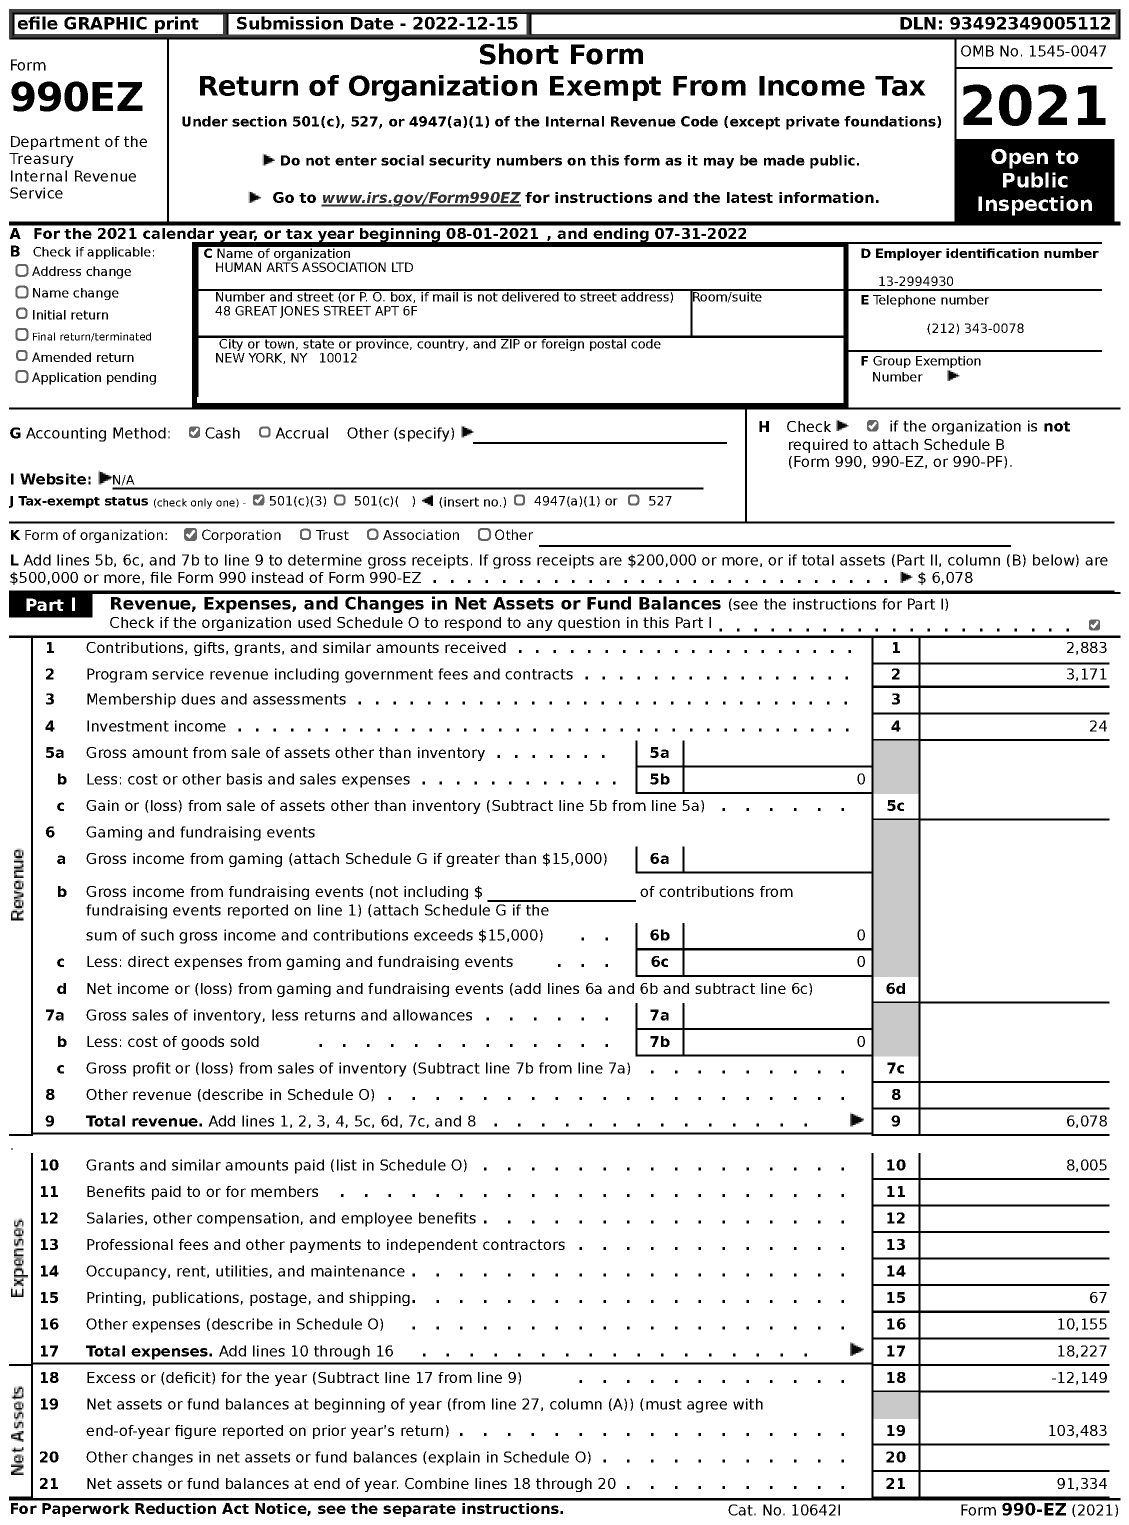 Image of first page of 2021 Form 990EZ for Human Arts Association